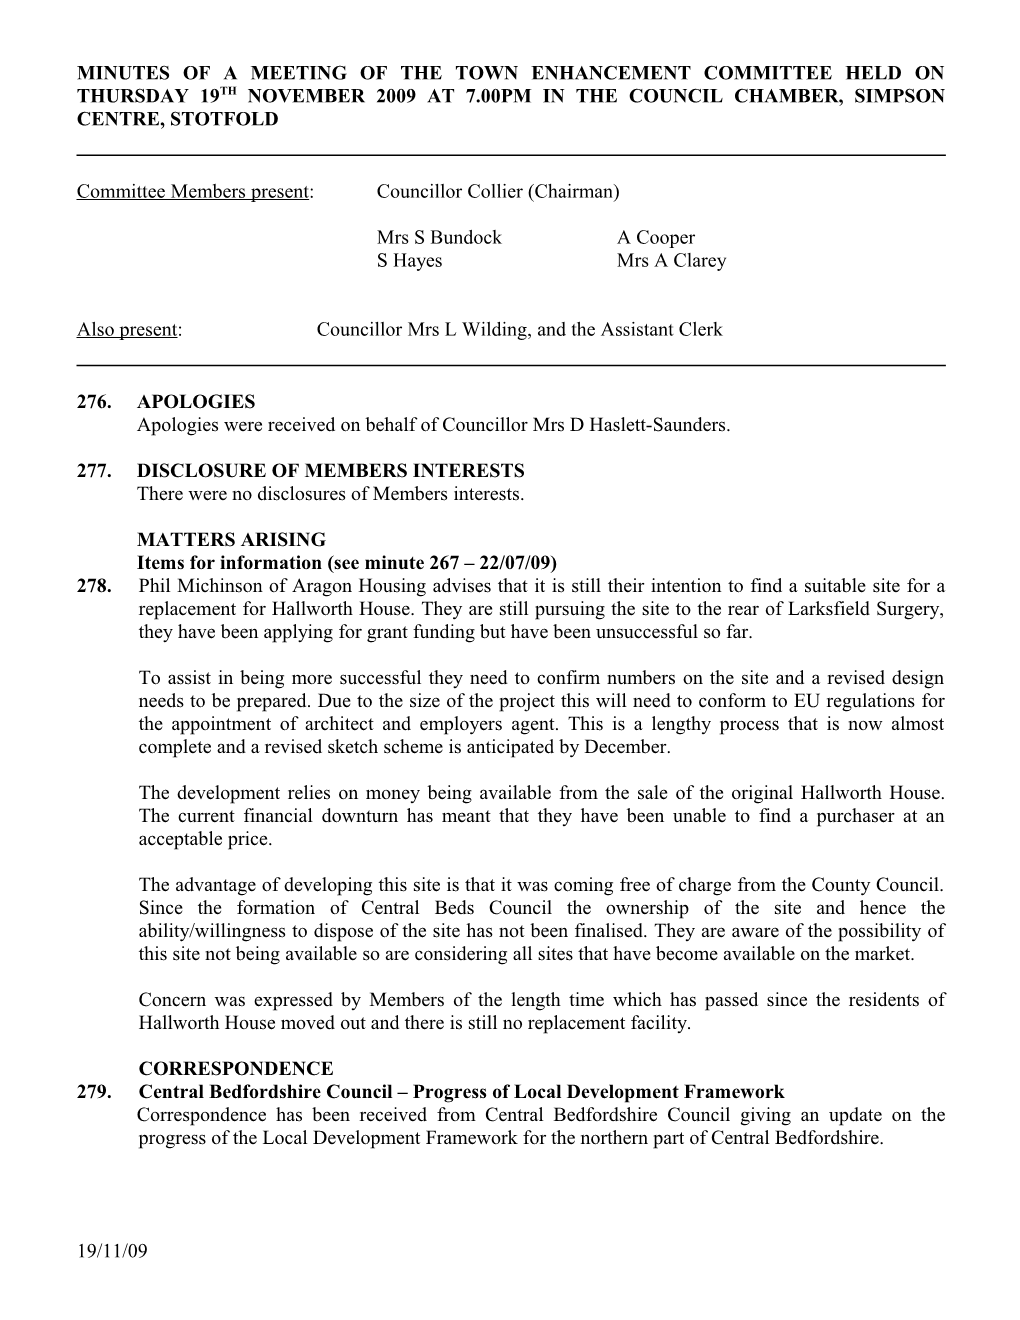 Minutes of a Meeting of the Town Enhancement Committee Held on Wednesday 22Nd July 2009 at 7